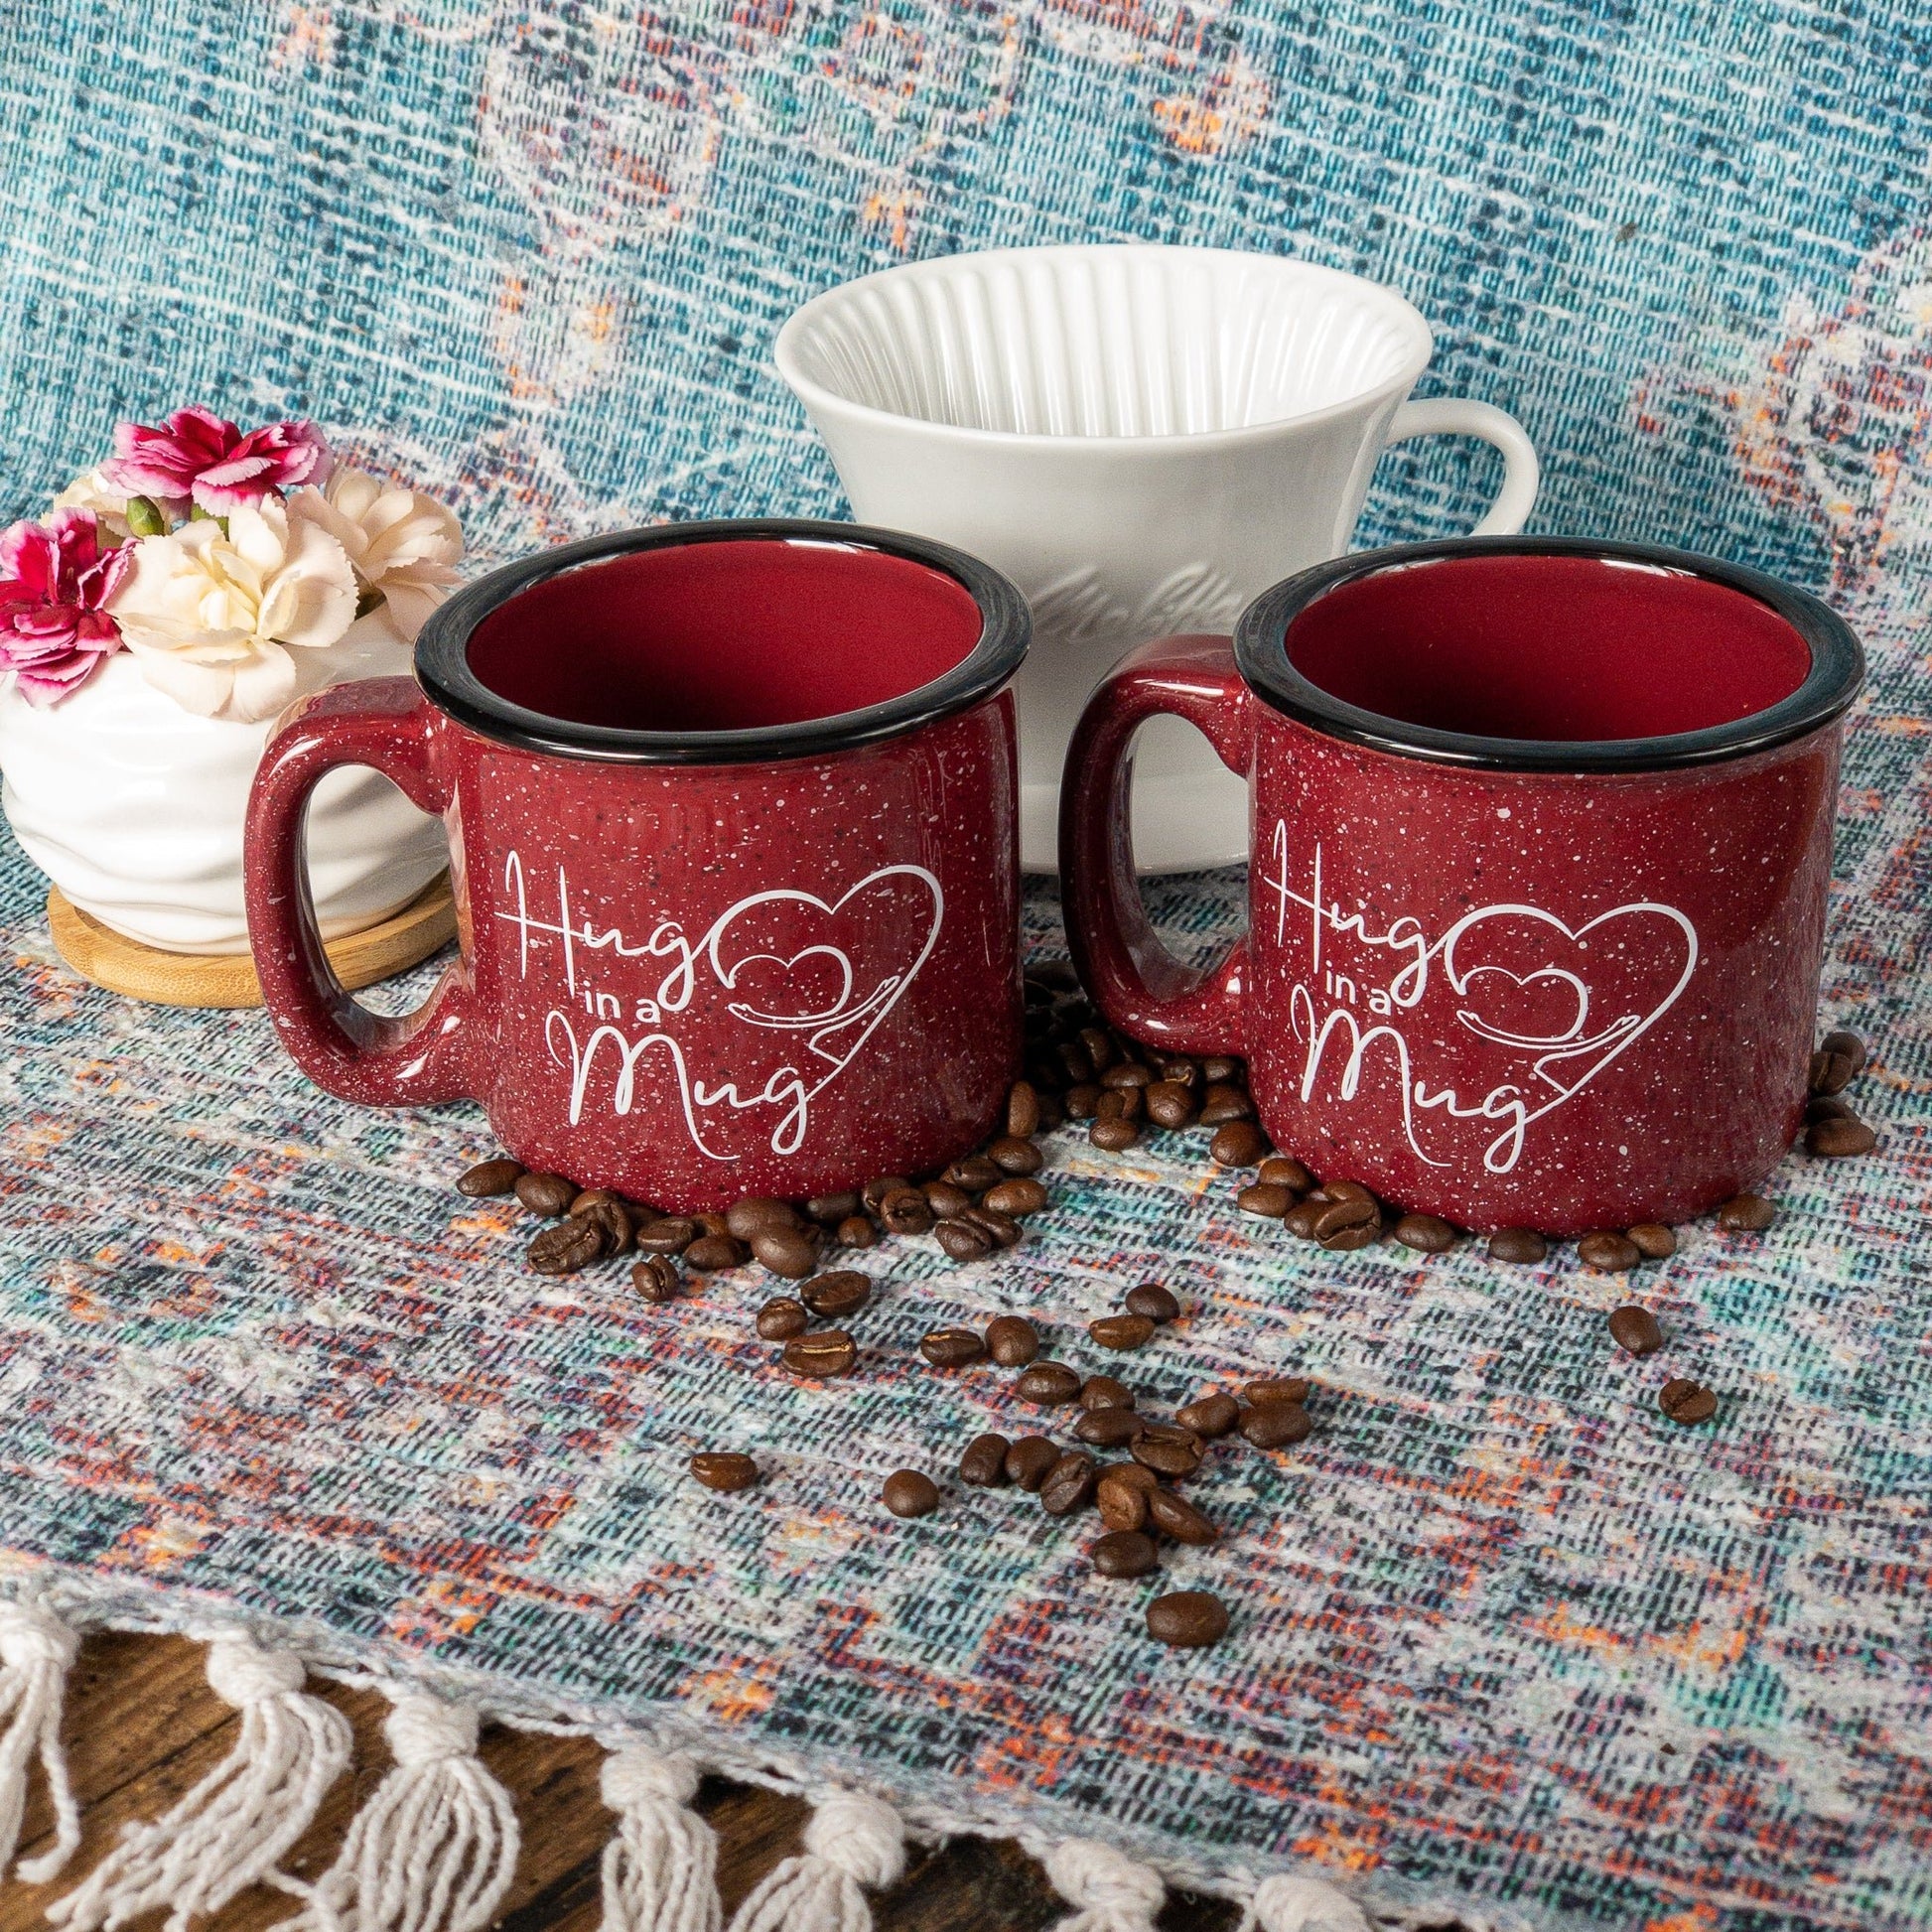 Pour Over Gift Set with Gourmet Coffee and "Hug in a Mug" Ceramic Mug Valentine's Day Gift Basket - The Meeting Place on Market